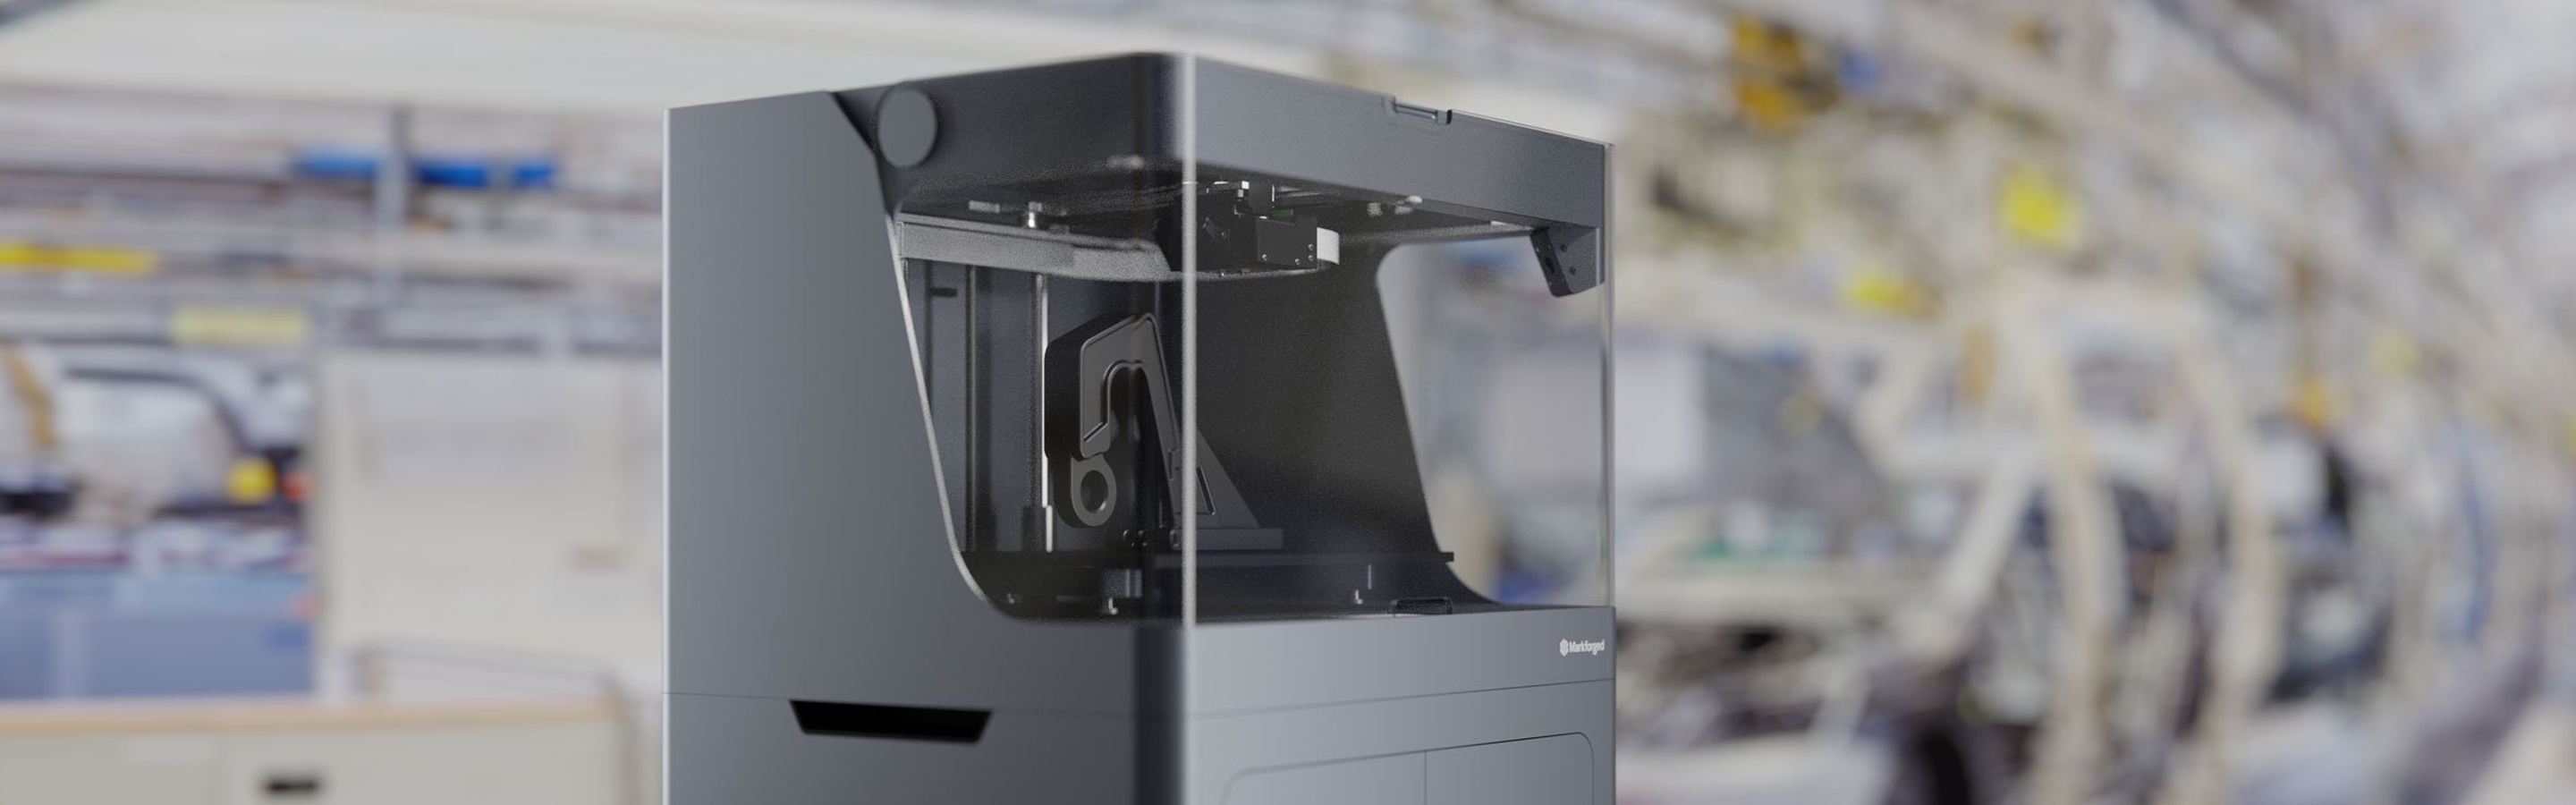 Konica Minolta New Zealand launches Markforged 3D printers in local market